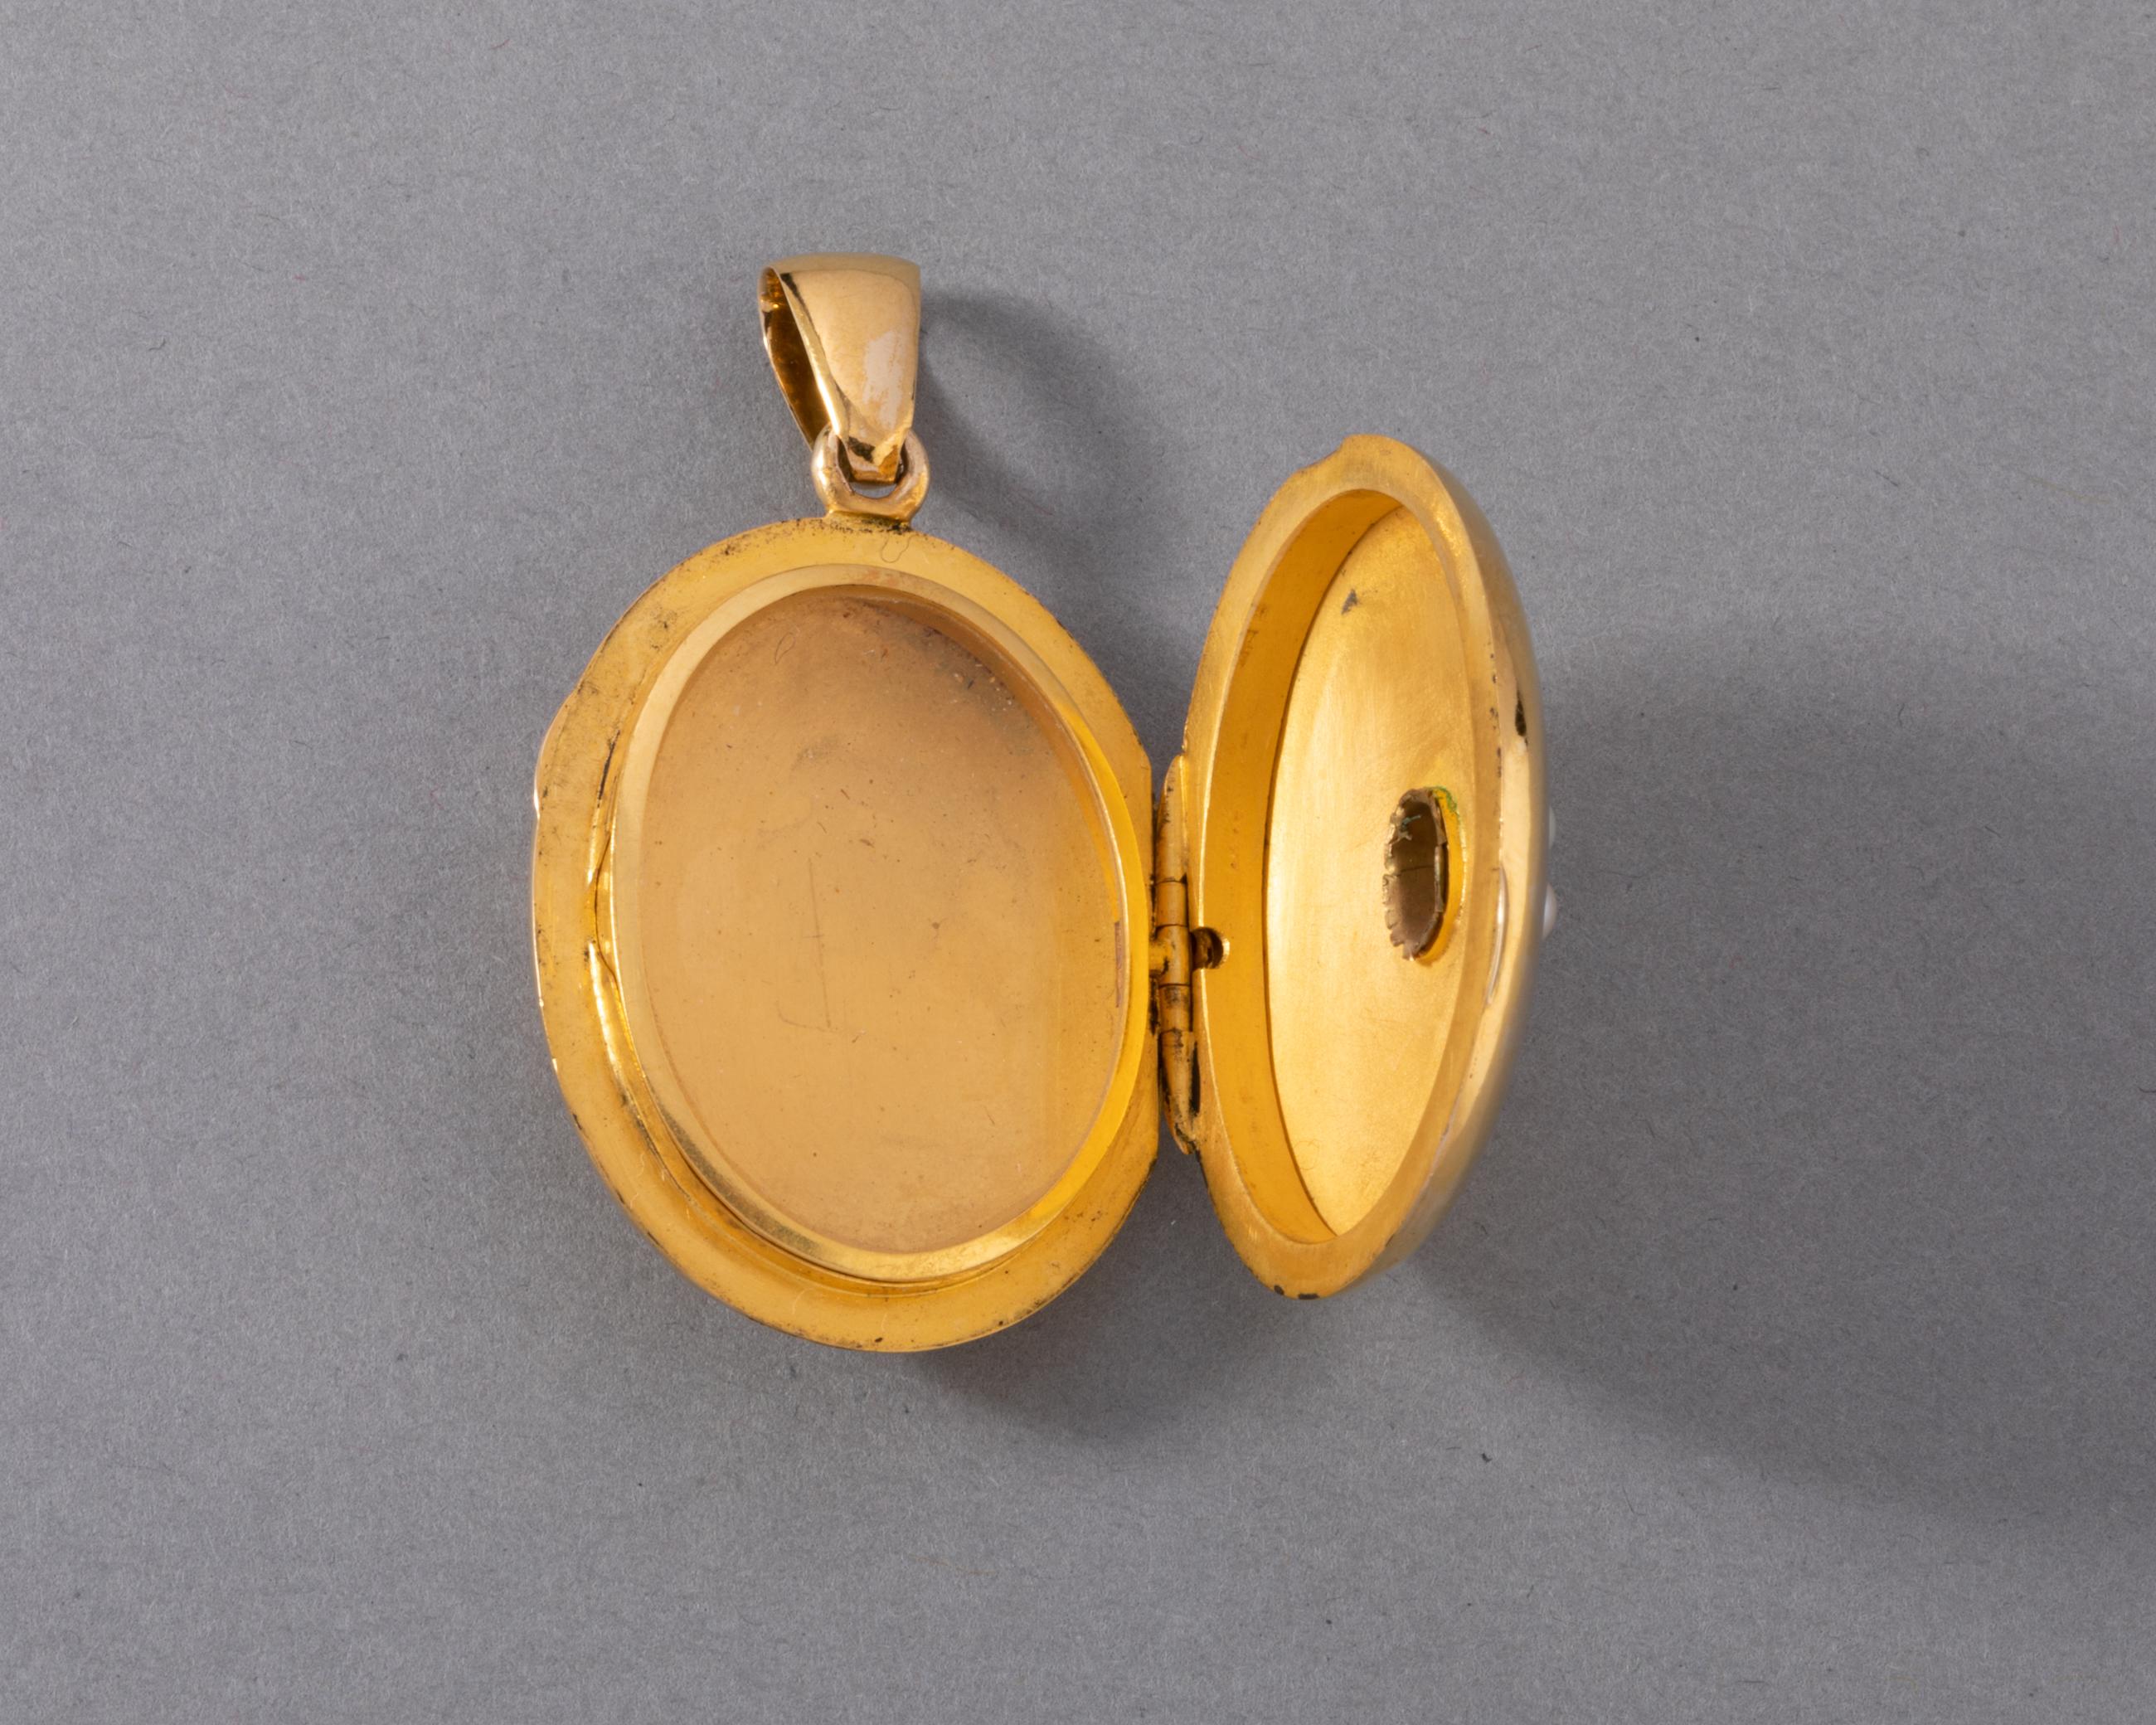 One lovely antique locket, made in France circa 1860.
Made in yellow gold,18k and pearls.
Dimension:45 mm height and 25 mm width.
Total weight: 11.50 grams